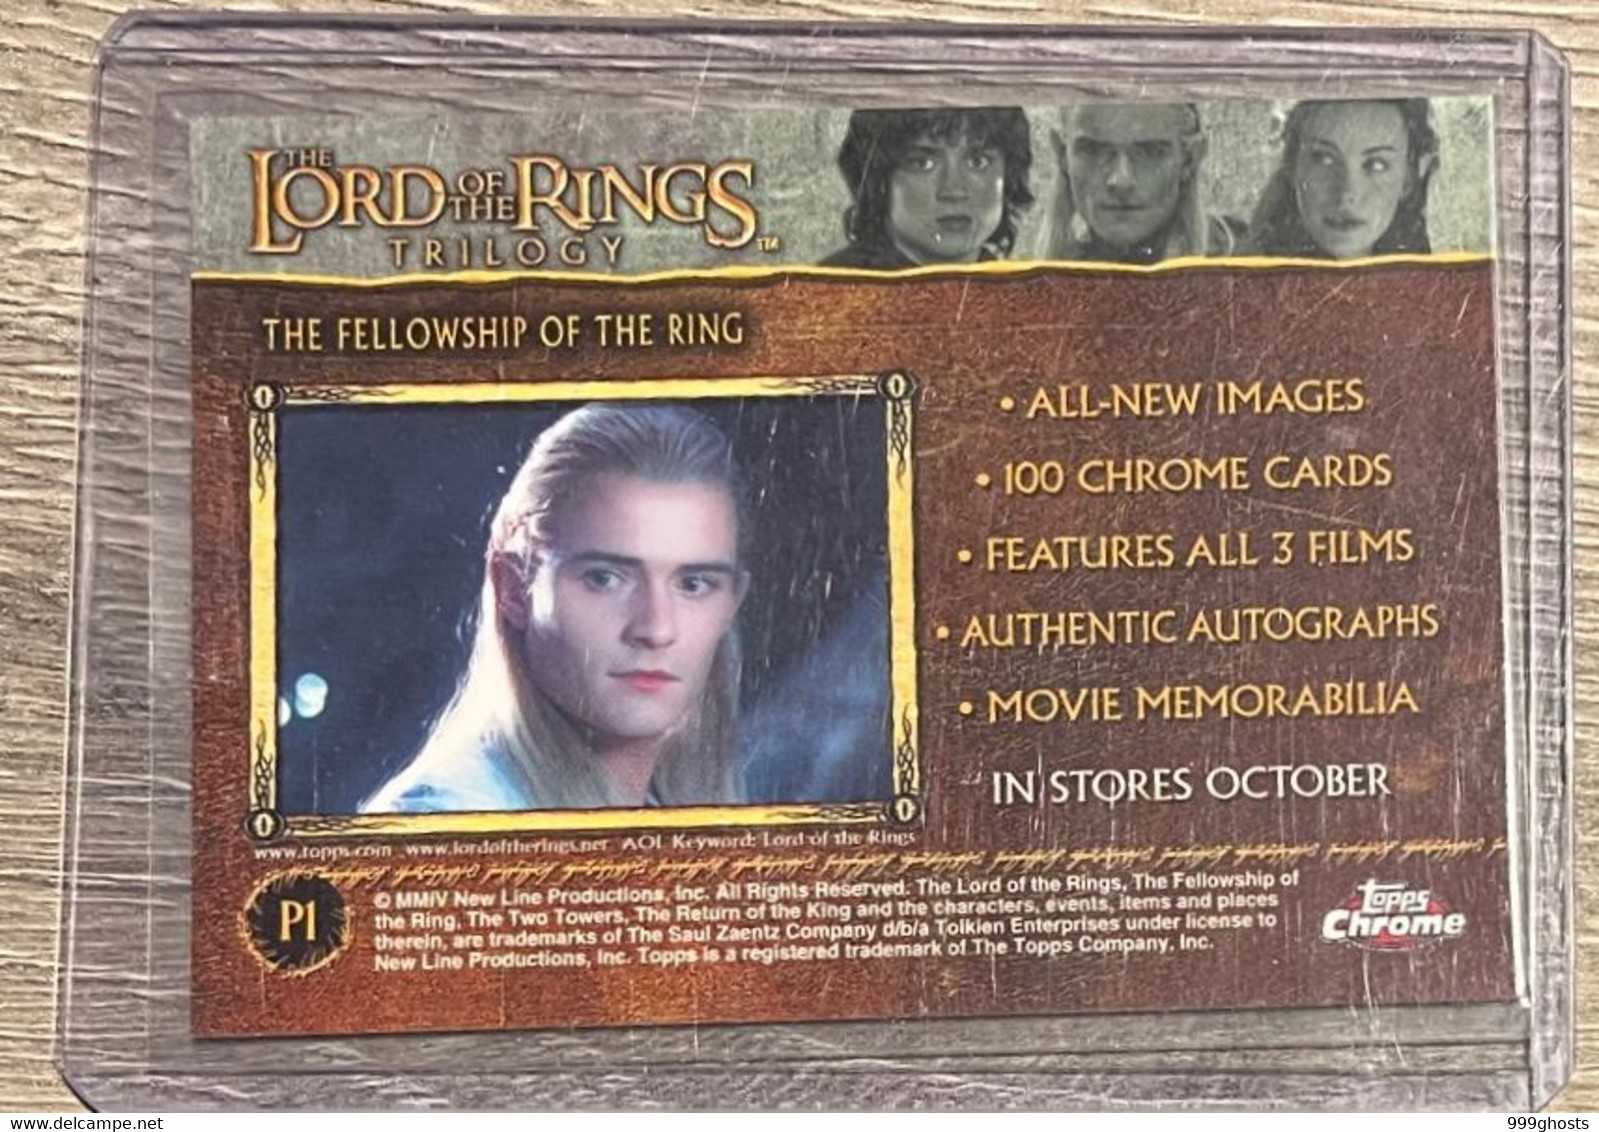 Lord Of The Rings Trilogy PROMO Trading Card Fellowship Of The Ring P1 - Mint Condition - Herr Der Ringe